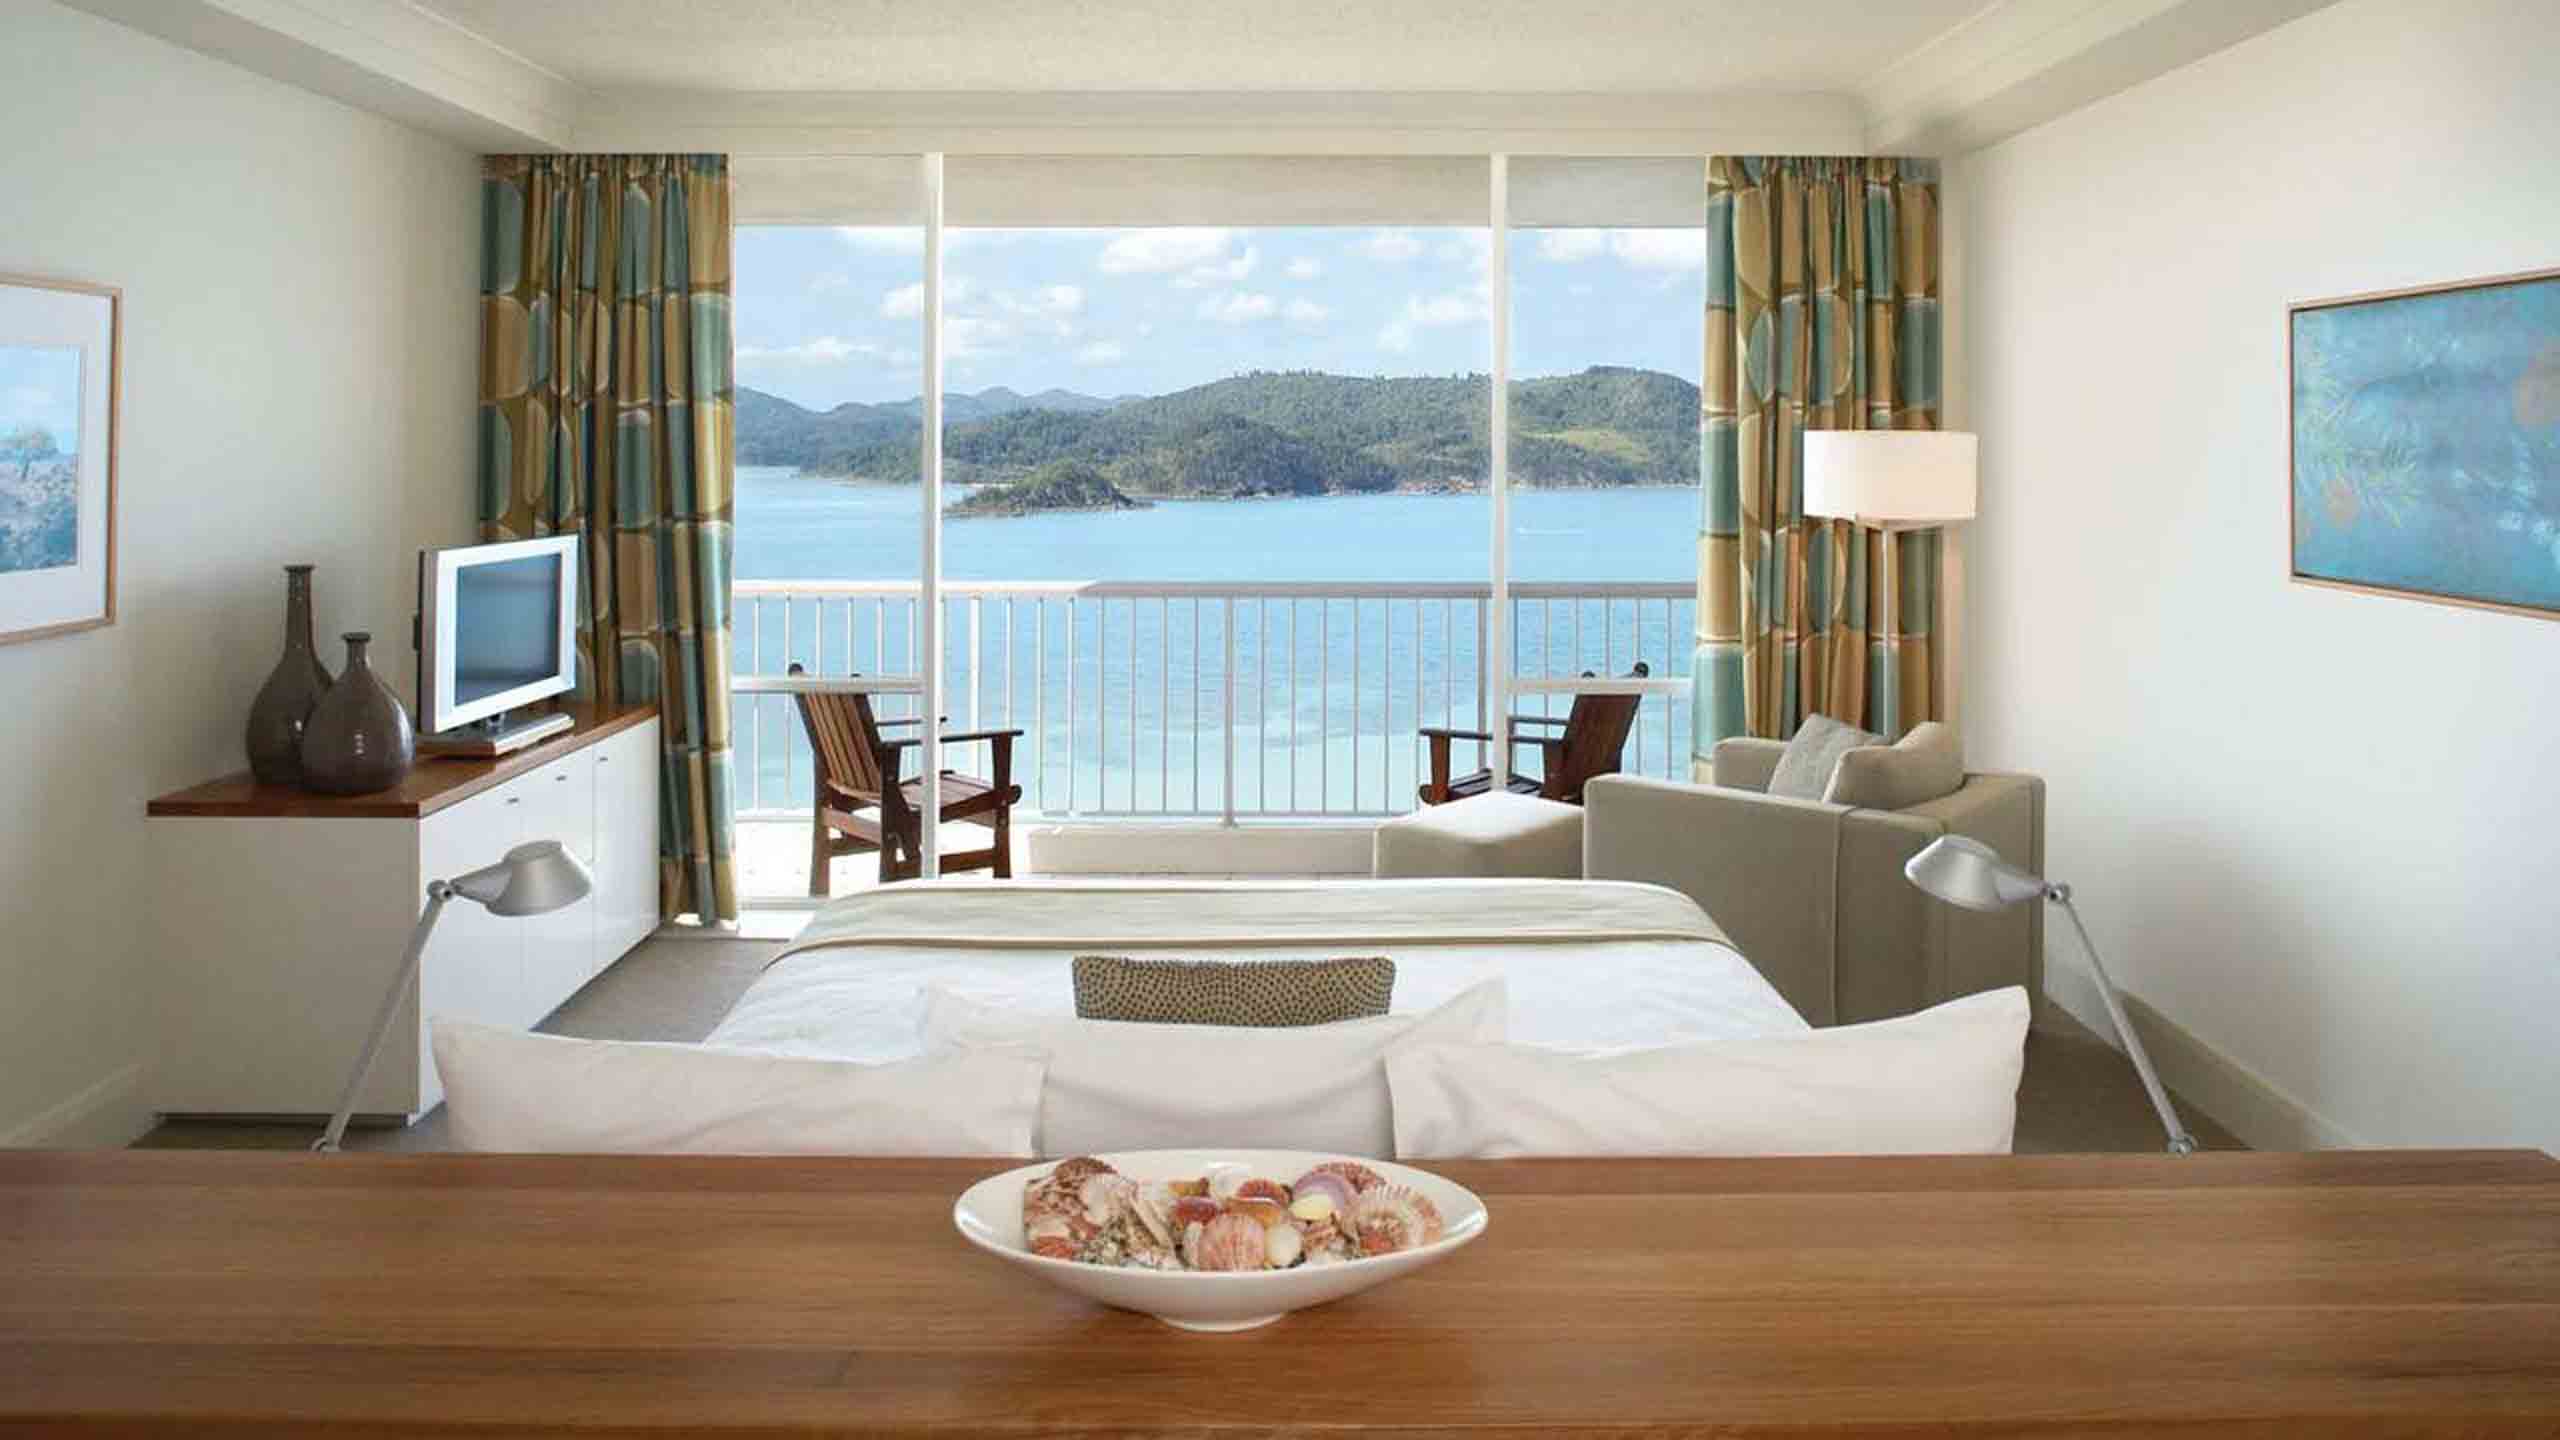 reef-view-hotel-great-barrier-reef-whitsundays-room-view